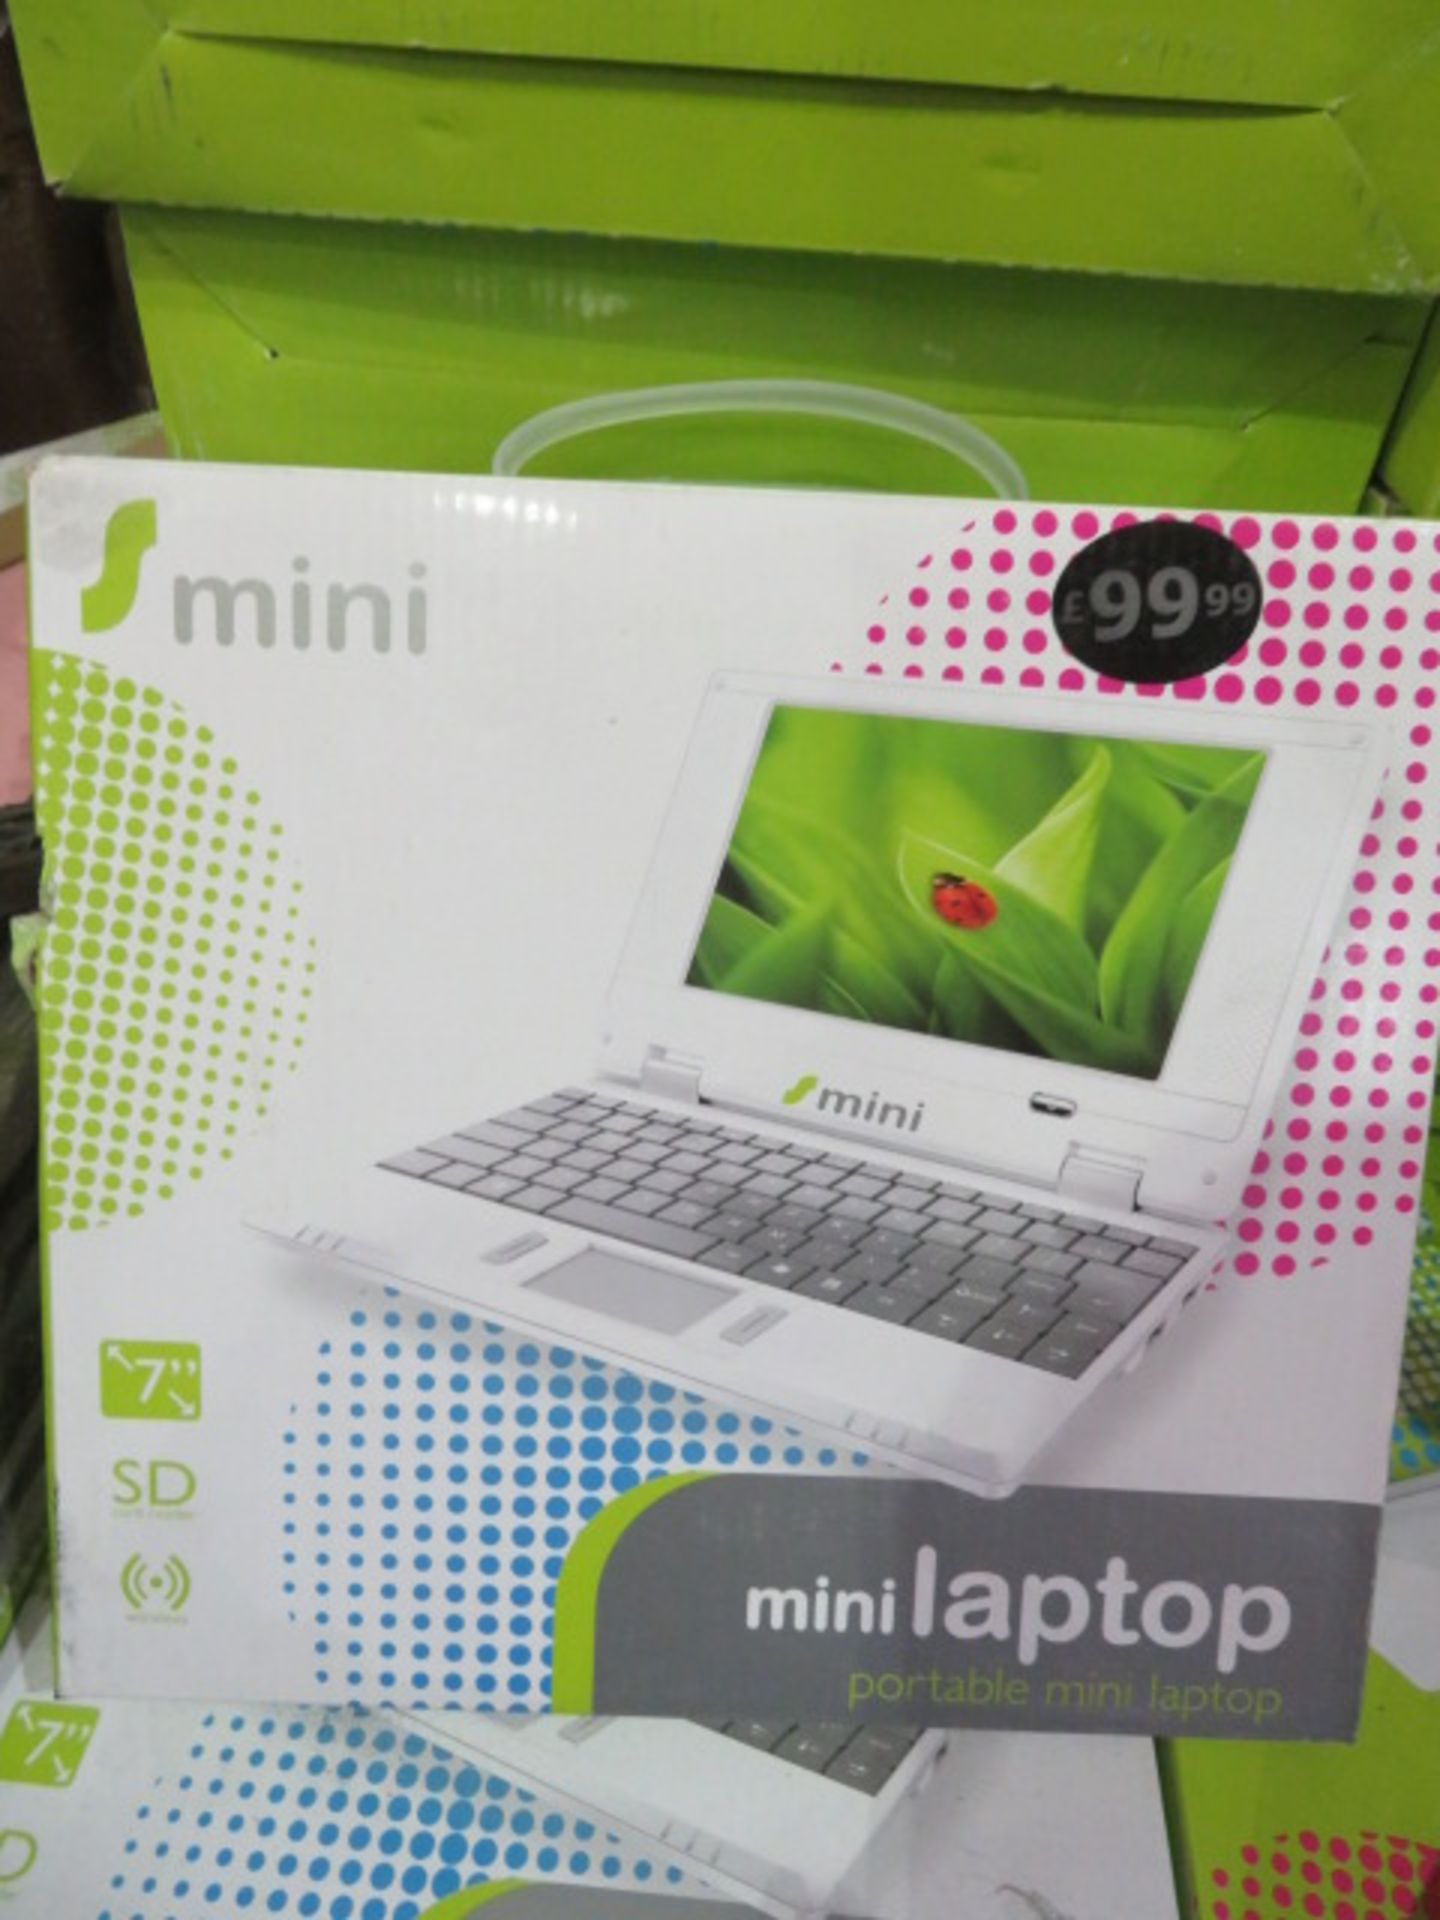 10 x S MINI - MINI PORTABLE LAPTOP - 7 INCH - SD CAR READER - WIRELESS. PRICED AT £99.99 EACH. NOTE: